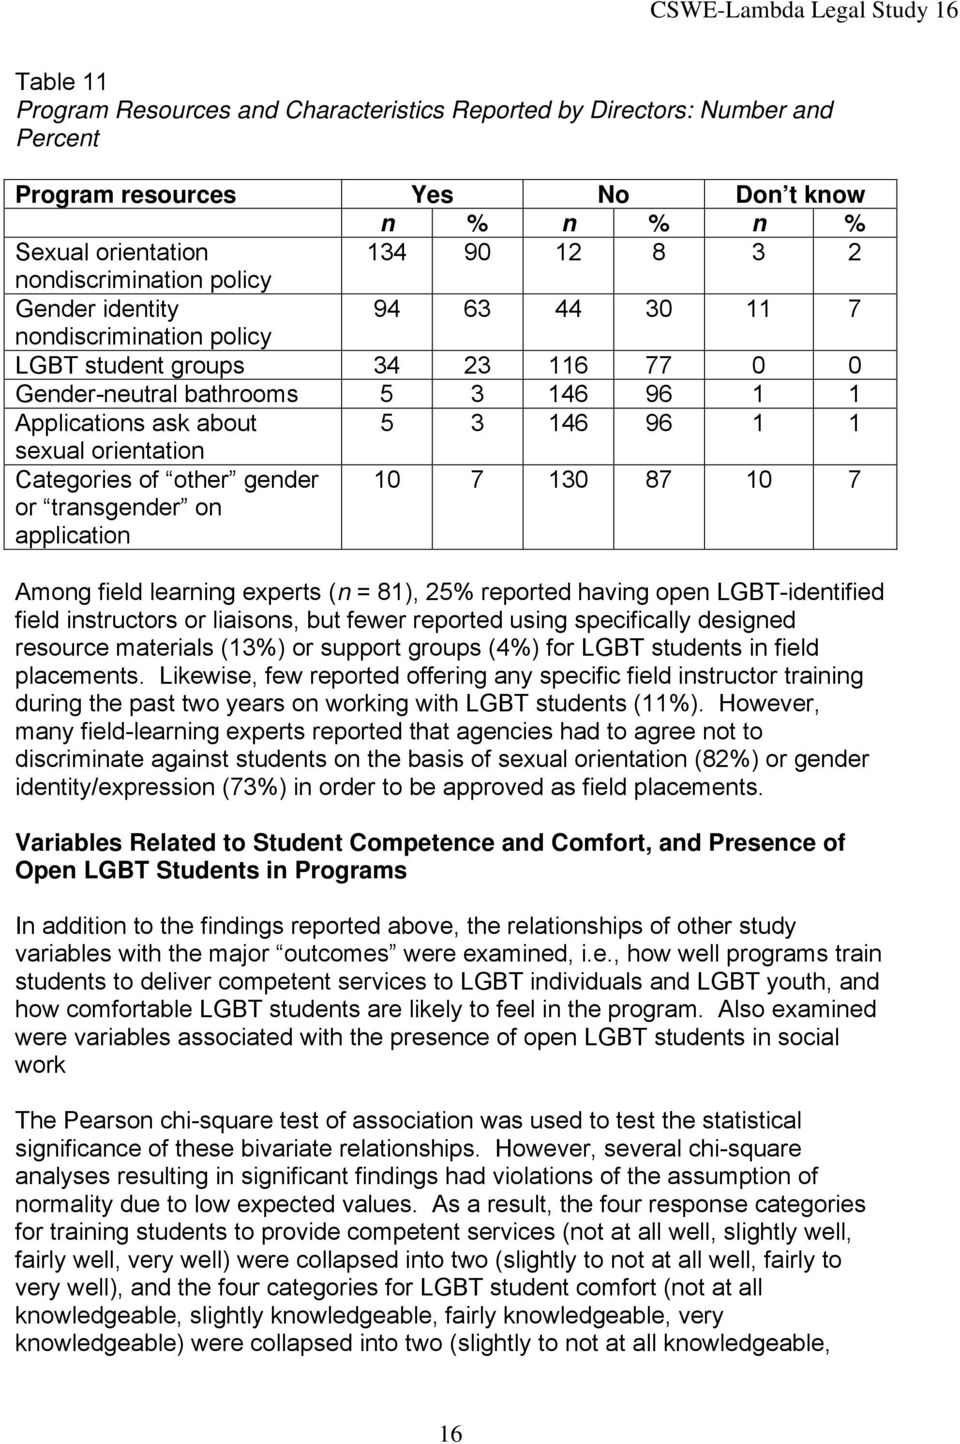 sexual orientation Categories of other gender or transgender on application 10 7 130 87 10 7 Among field learning experts (n = 81), 25% reported having open LGBT-identified field instructors or